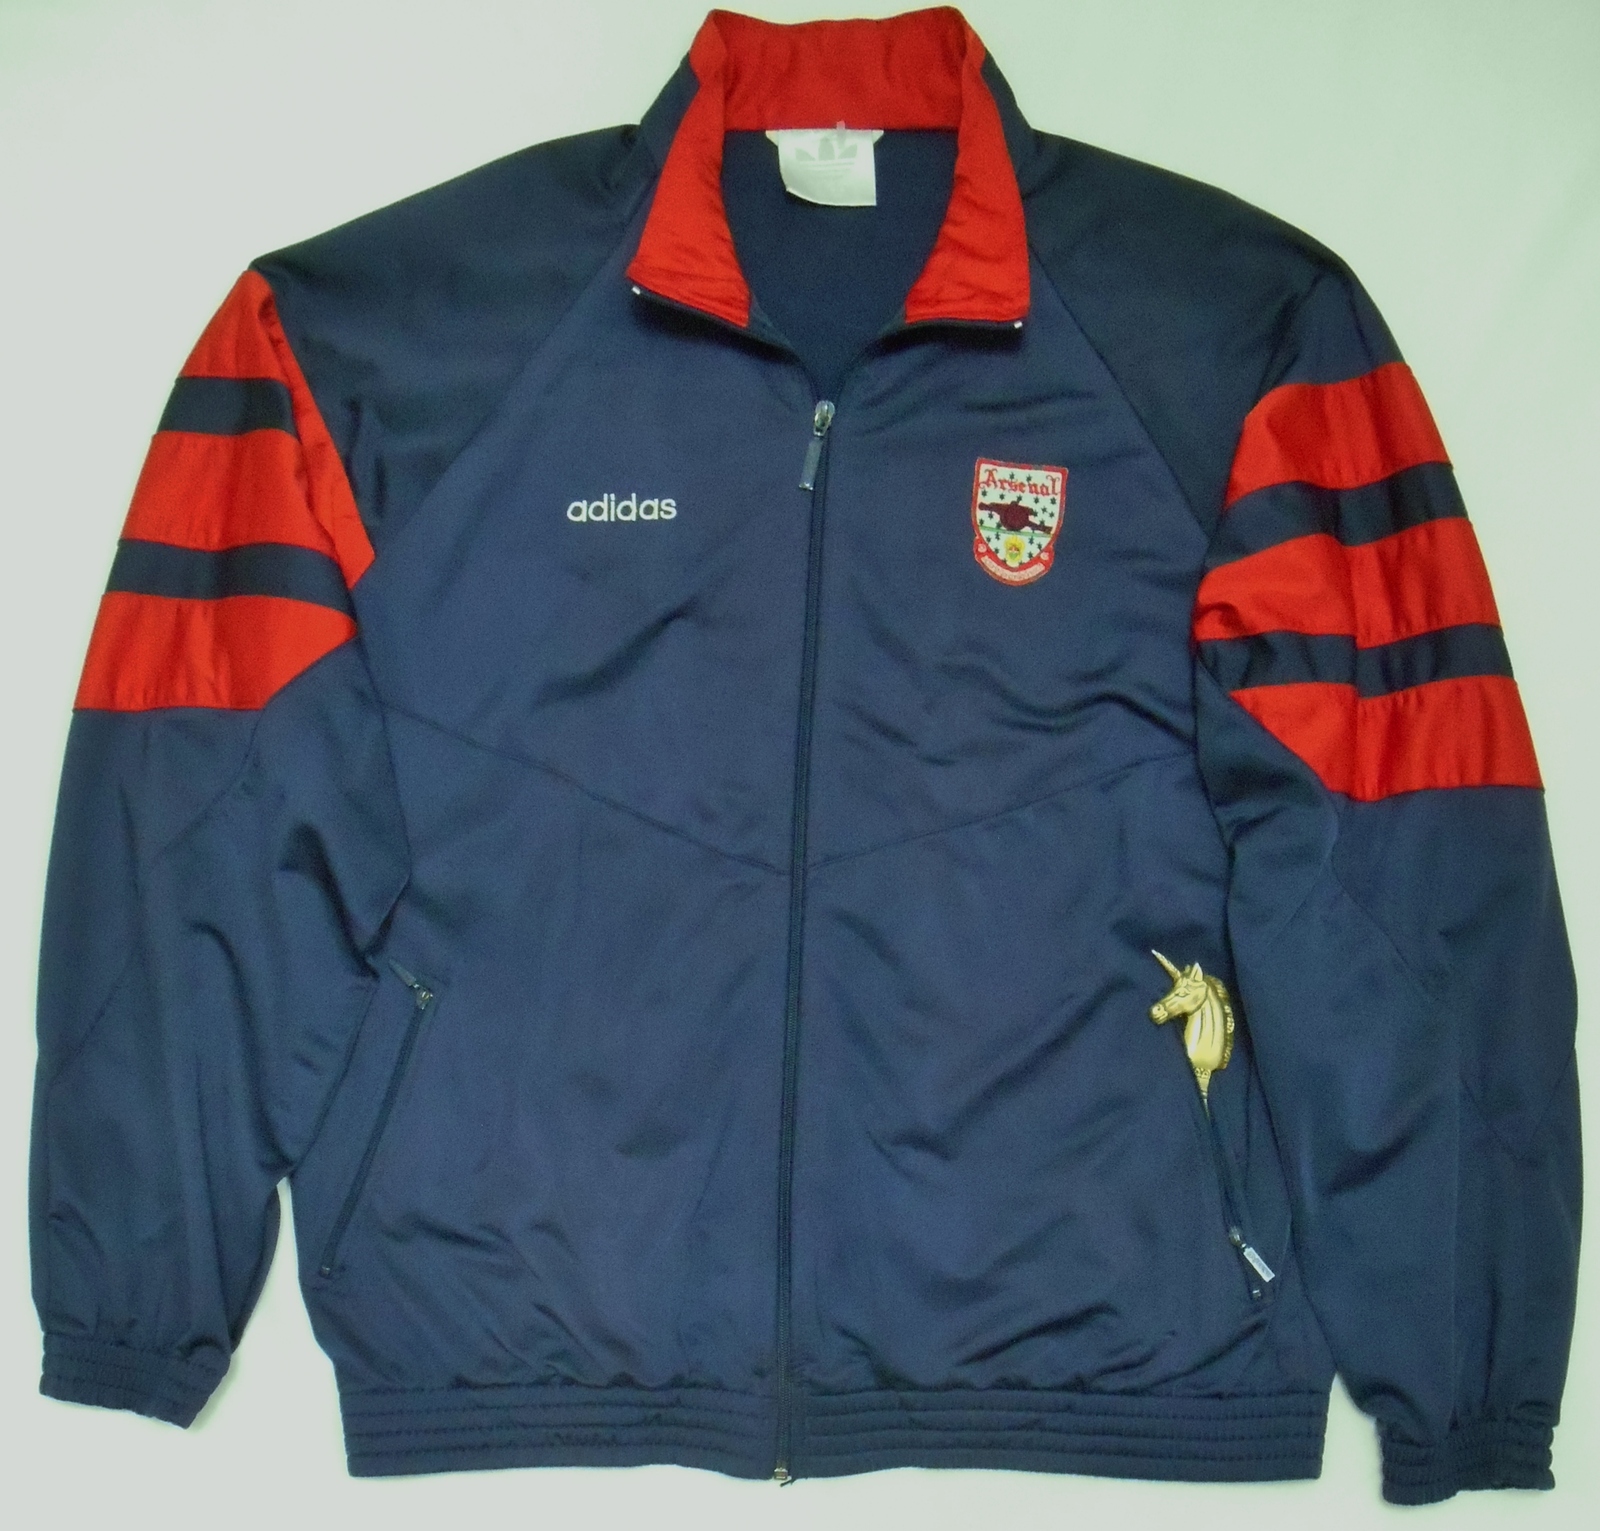 Primary image for ADIDAS Men's Vtg 90's ARSENAL FC Full Zip Track Jacket Navy Red sz L tag 42 /44